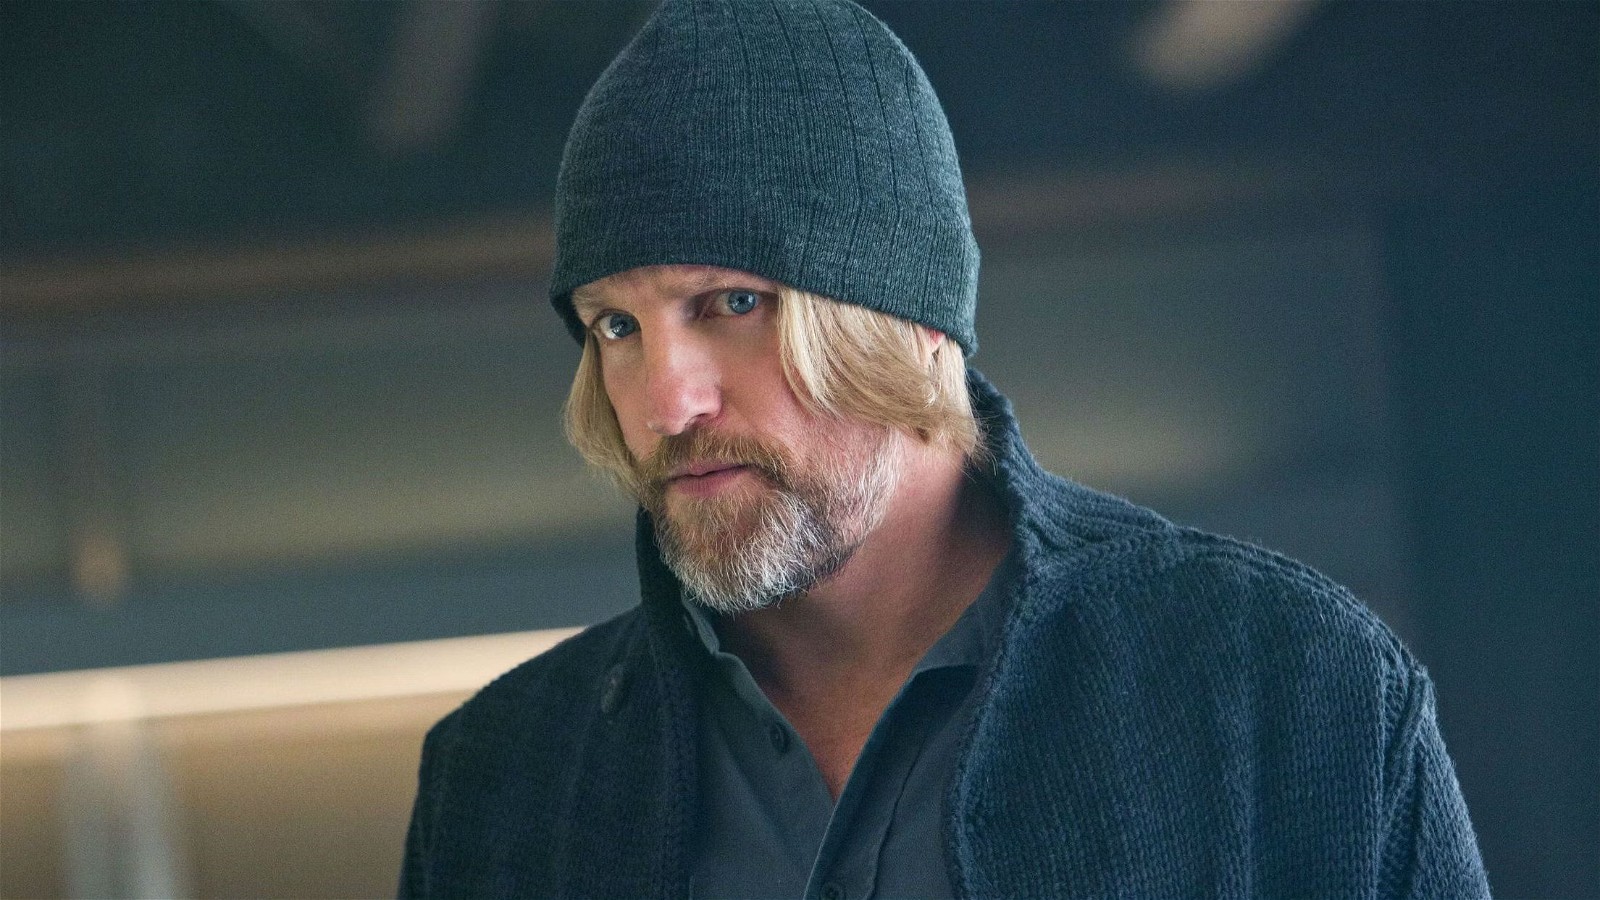 Woody Harrelson as Haymitch Abernathy in The Hunger Games [Credit: Lionsgate Films]